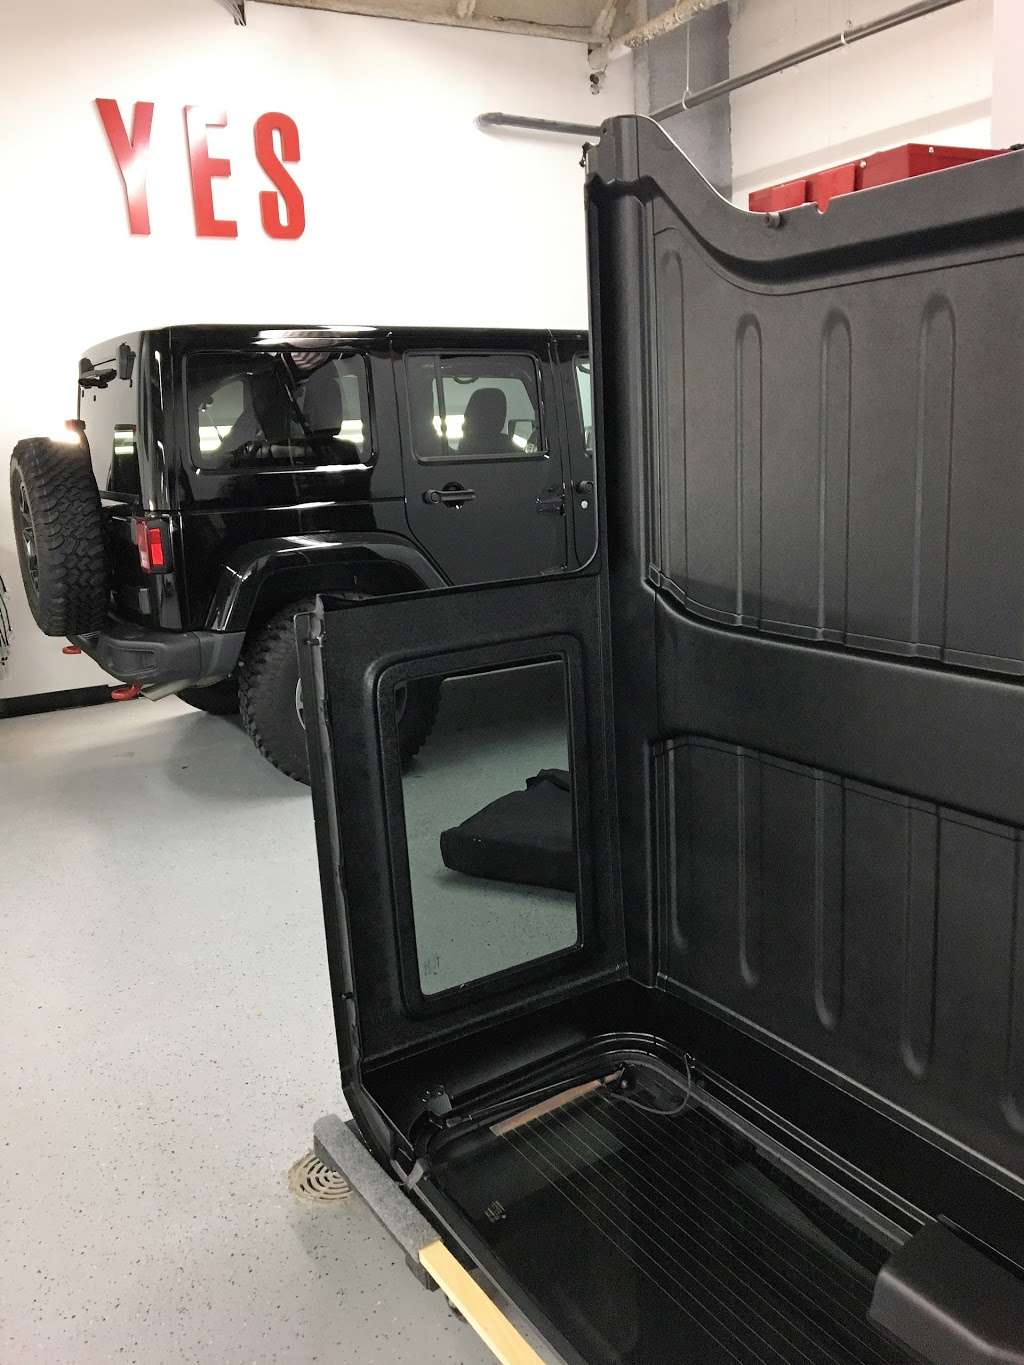 Jeep Wrangler Tops Switch & Storage Services | 88 Sugar Hollow Rd #6, Danbury, CT 06810 | Phone: (203) 460-4694